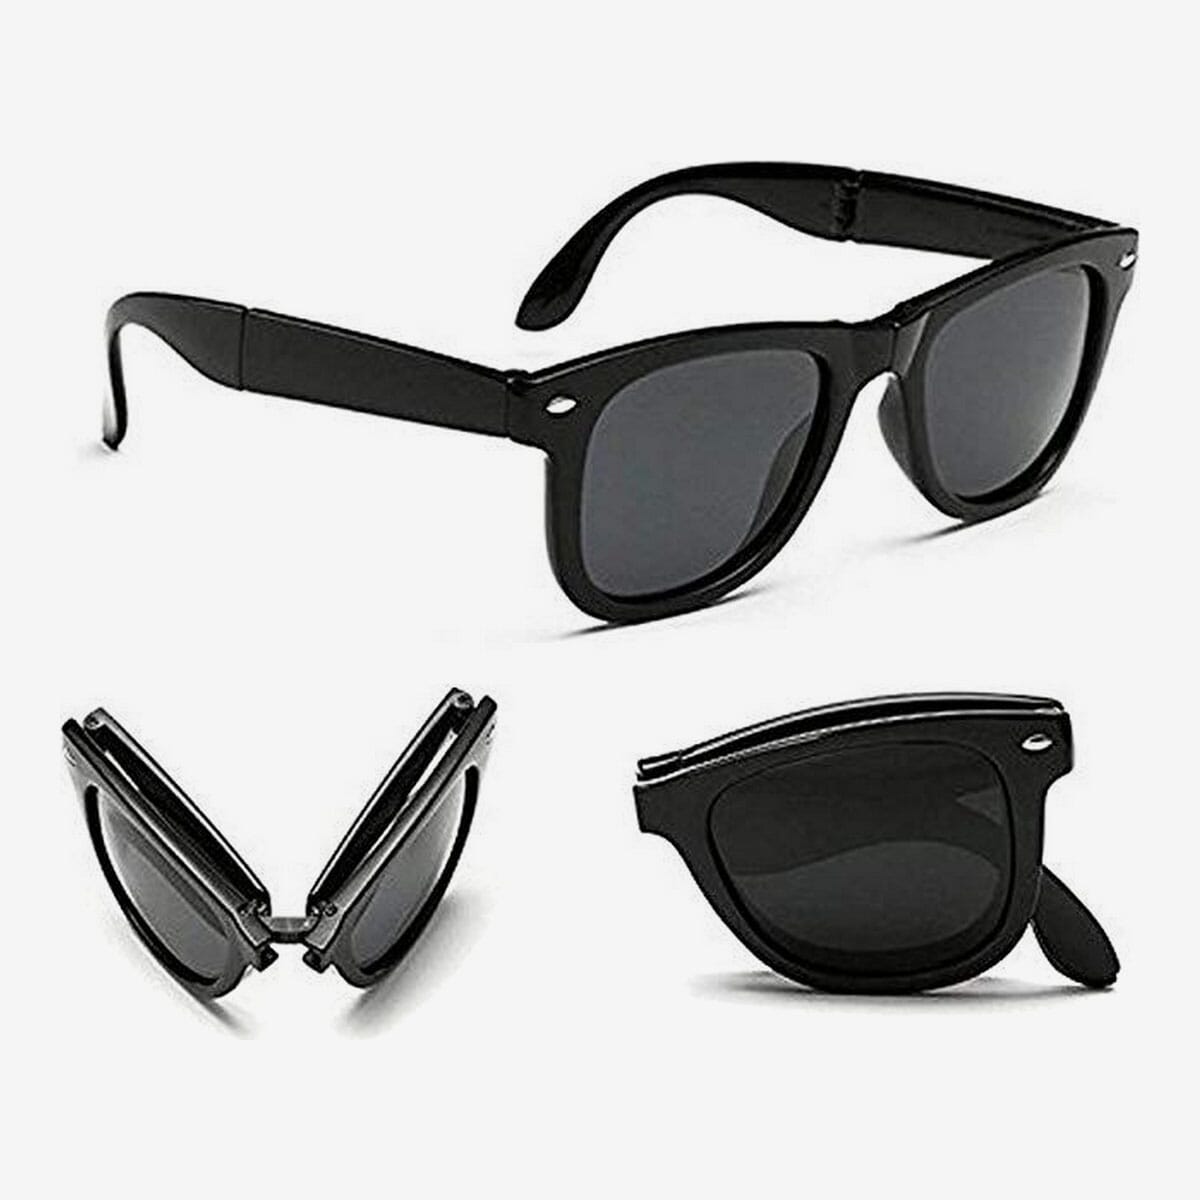 Men's Sunglasses In Nepal At Best Prices 